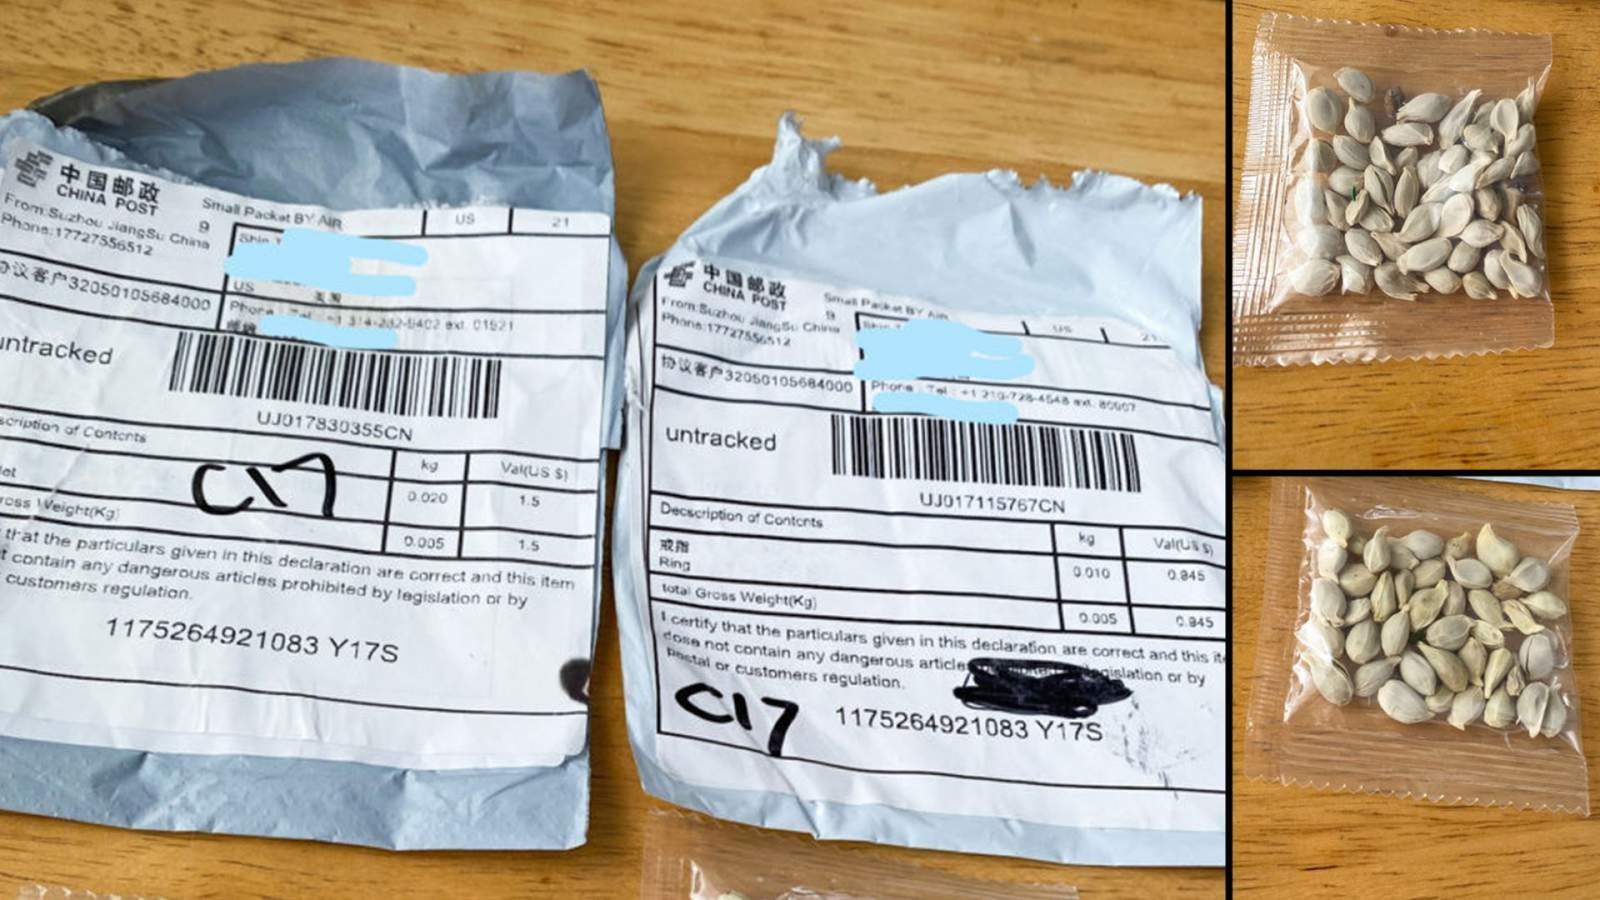 Did you get seeds from China in the mail? USDA says don’t plant them